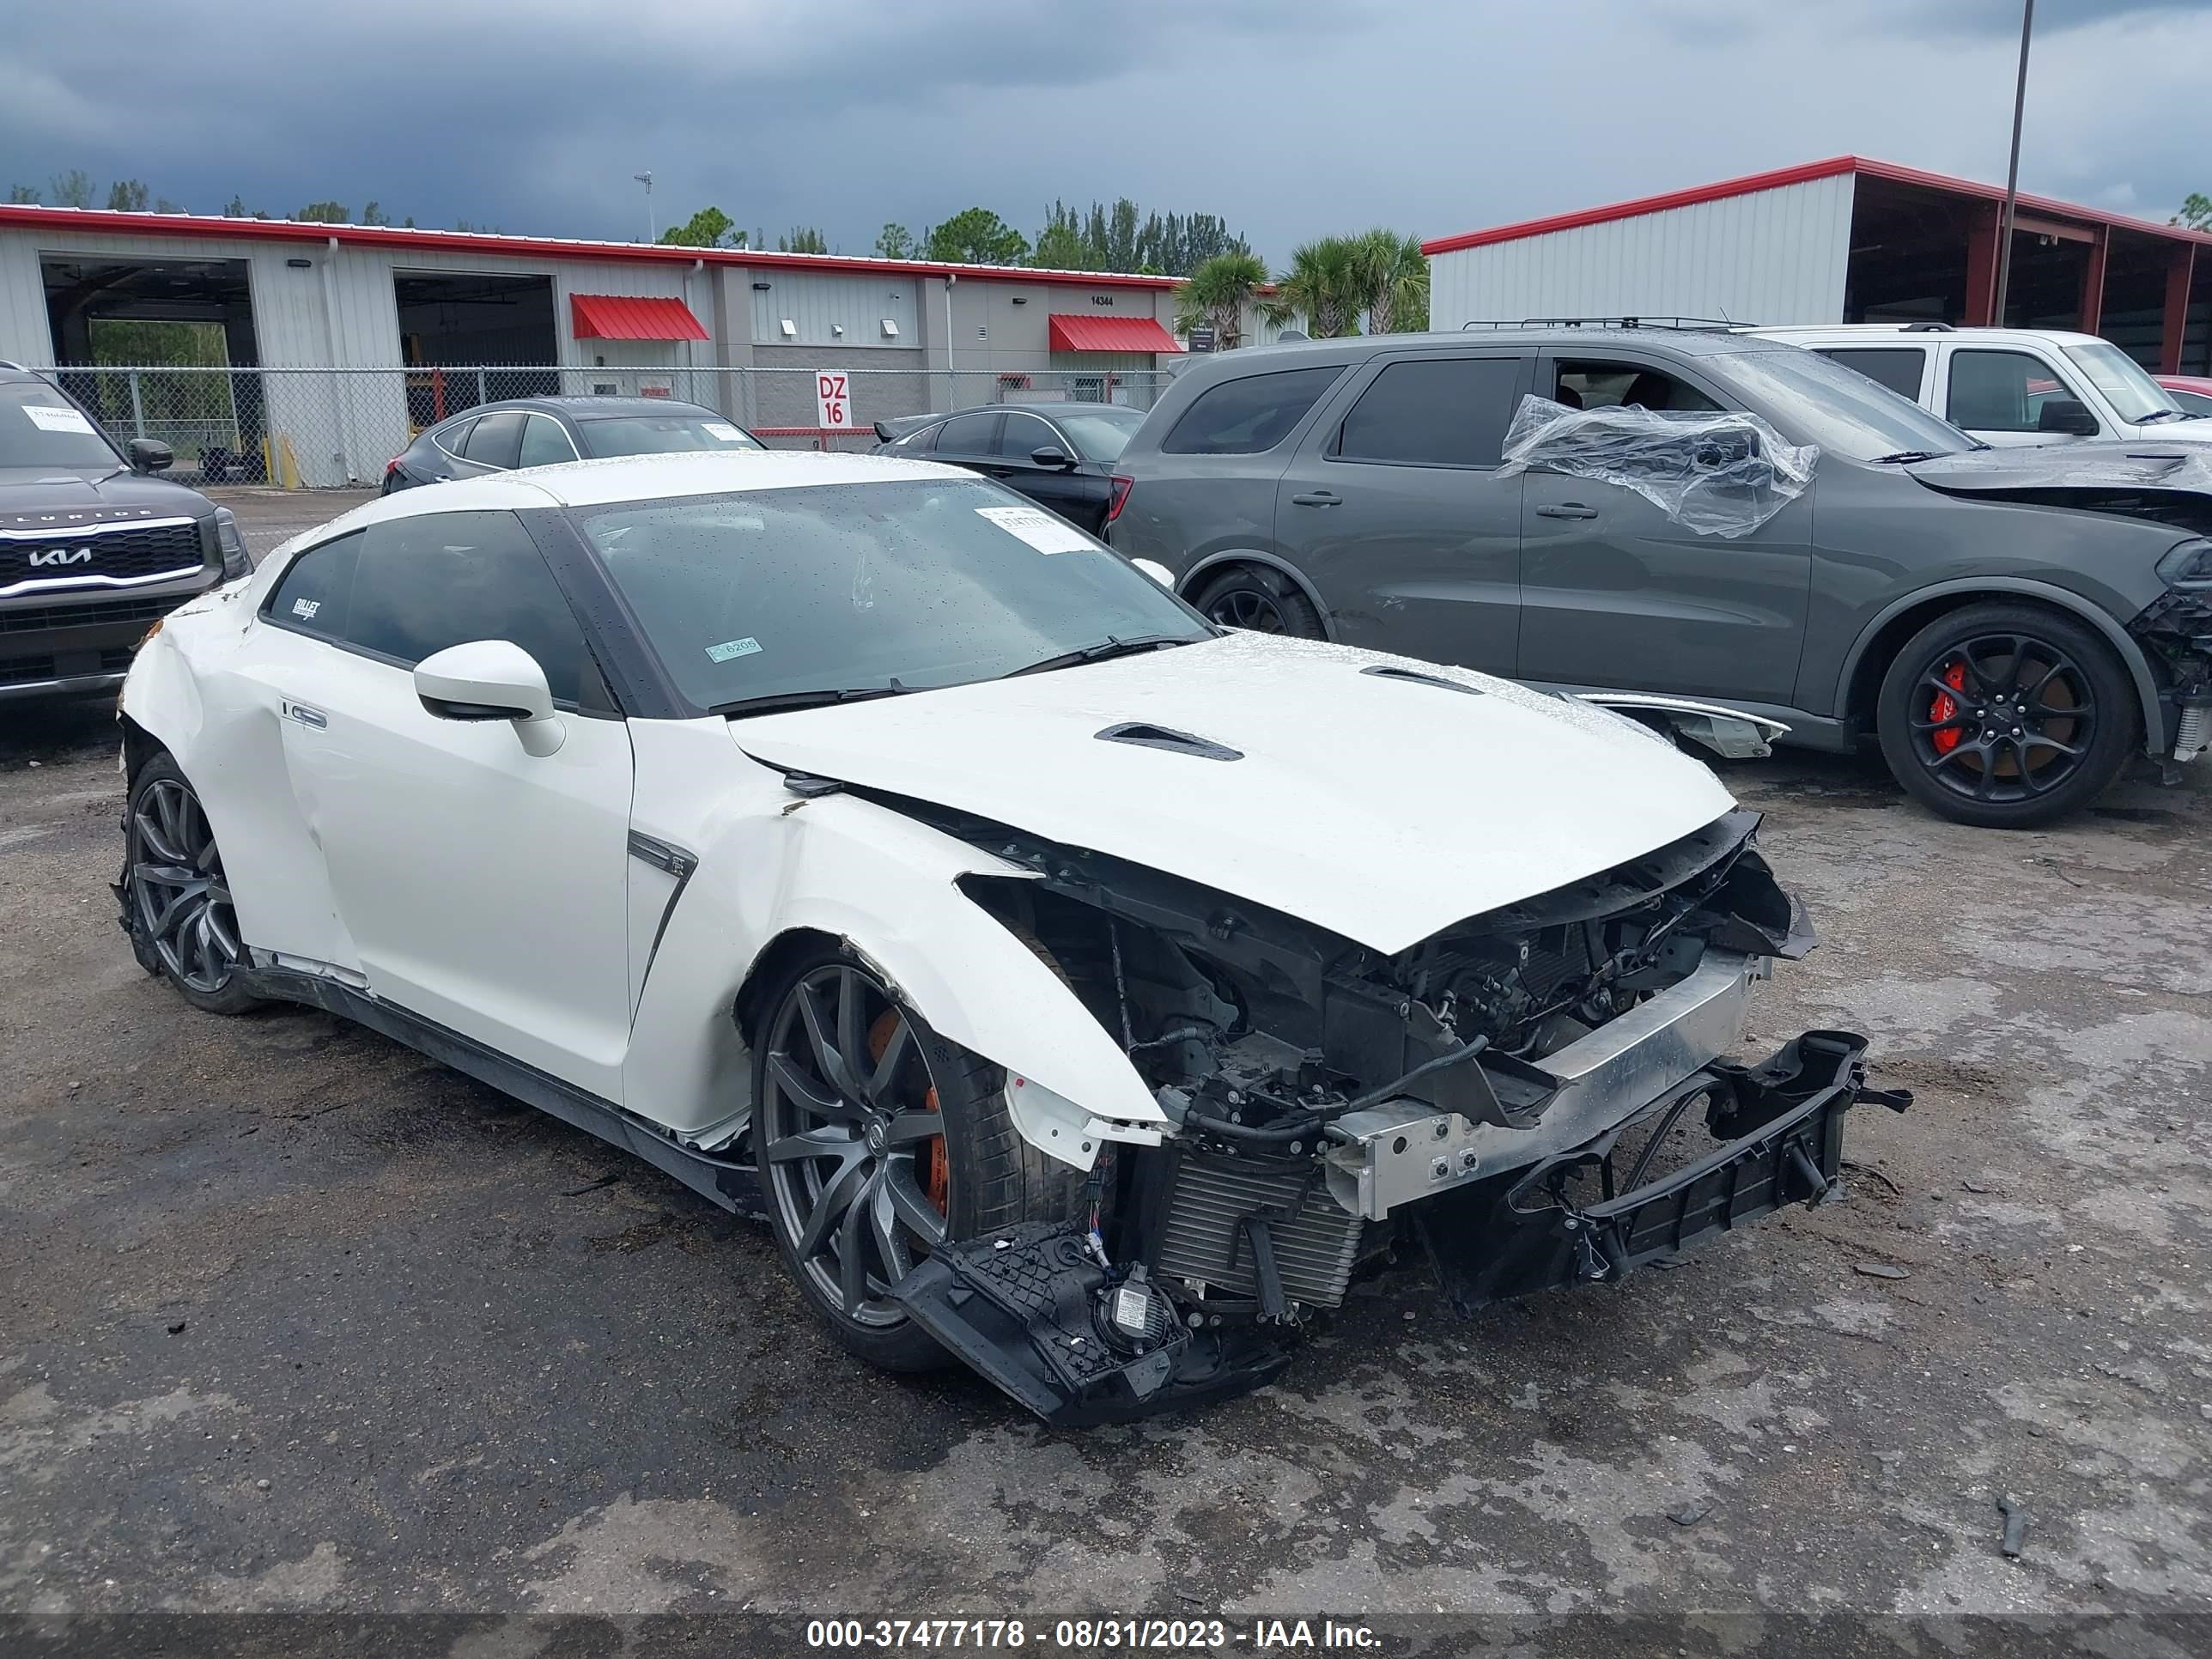 vin: JN1AR5EF6EM271300 JN1AR5EF6EM271300 2014 nissan gt-r 3800 for Sale in 33478, 14344 Corporate Rd S, Jupiter, Florida, USA